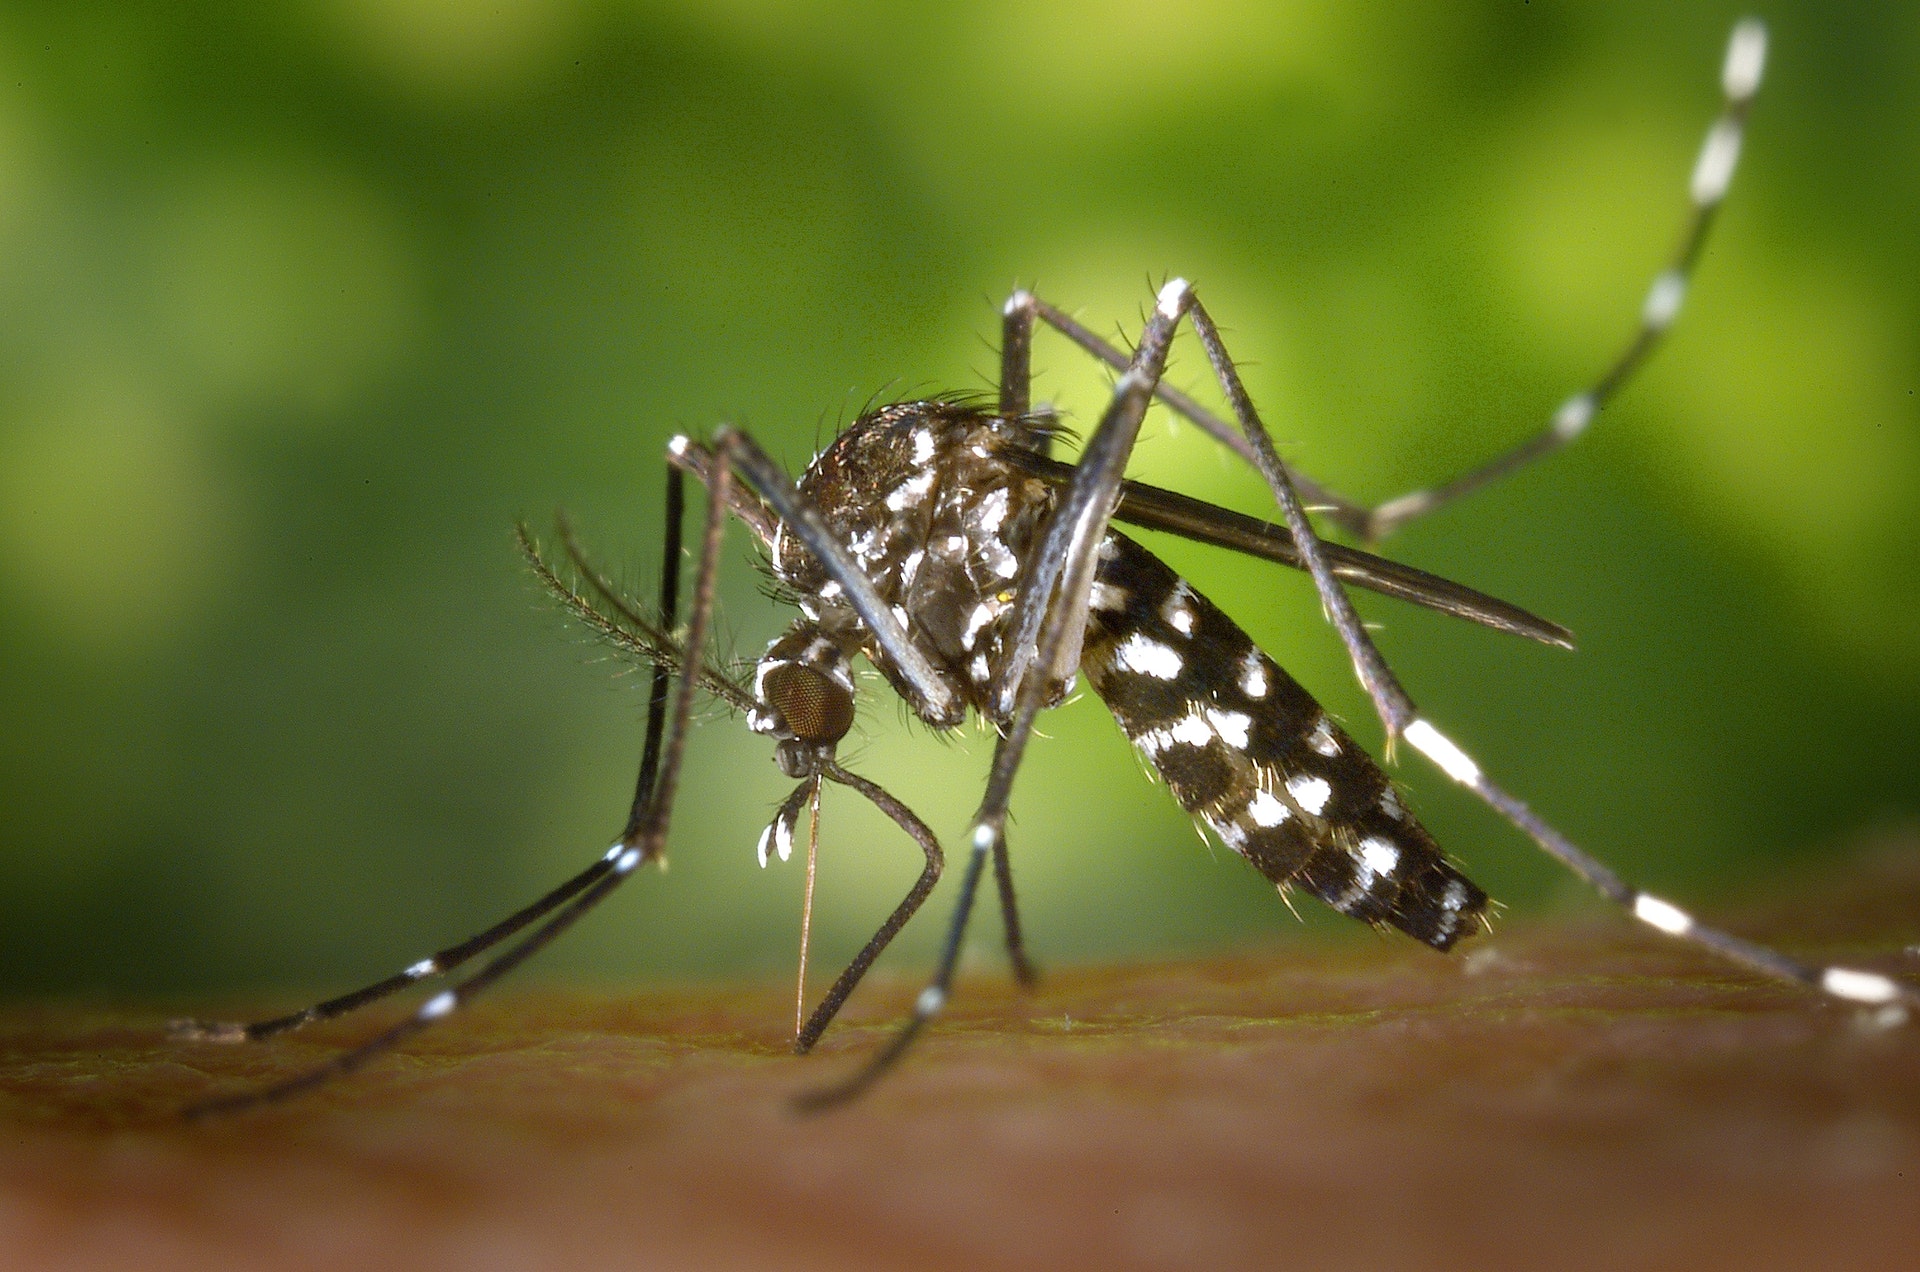 The first US trial to release GMO mosquitoes just ended. Here’s how it went.